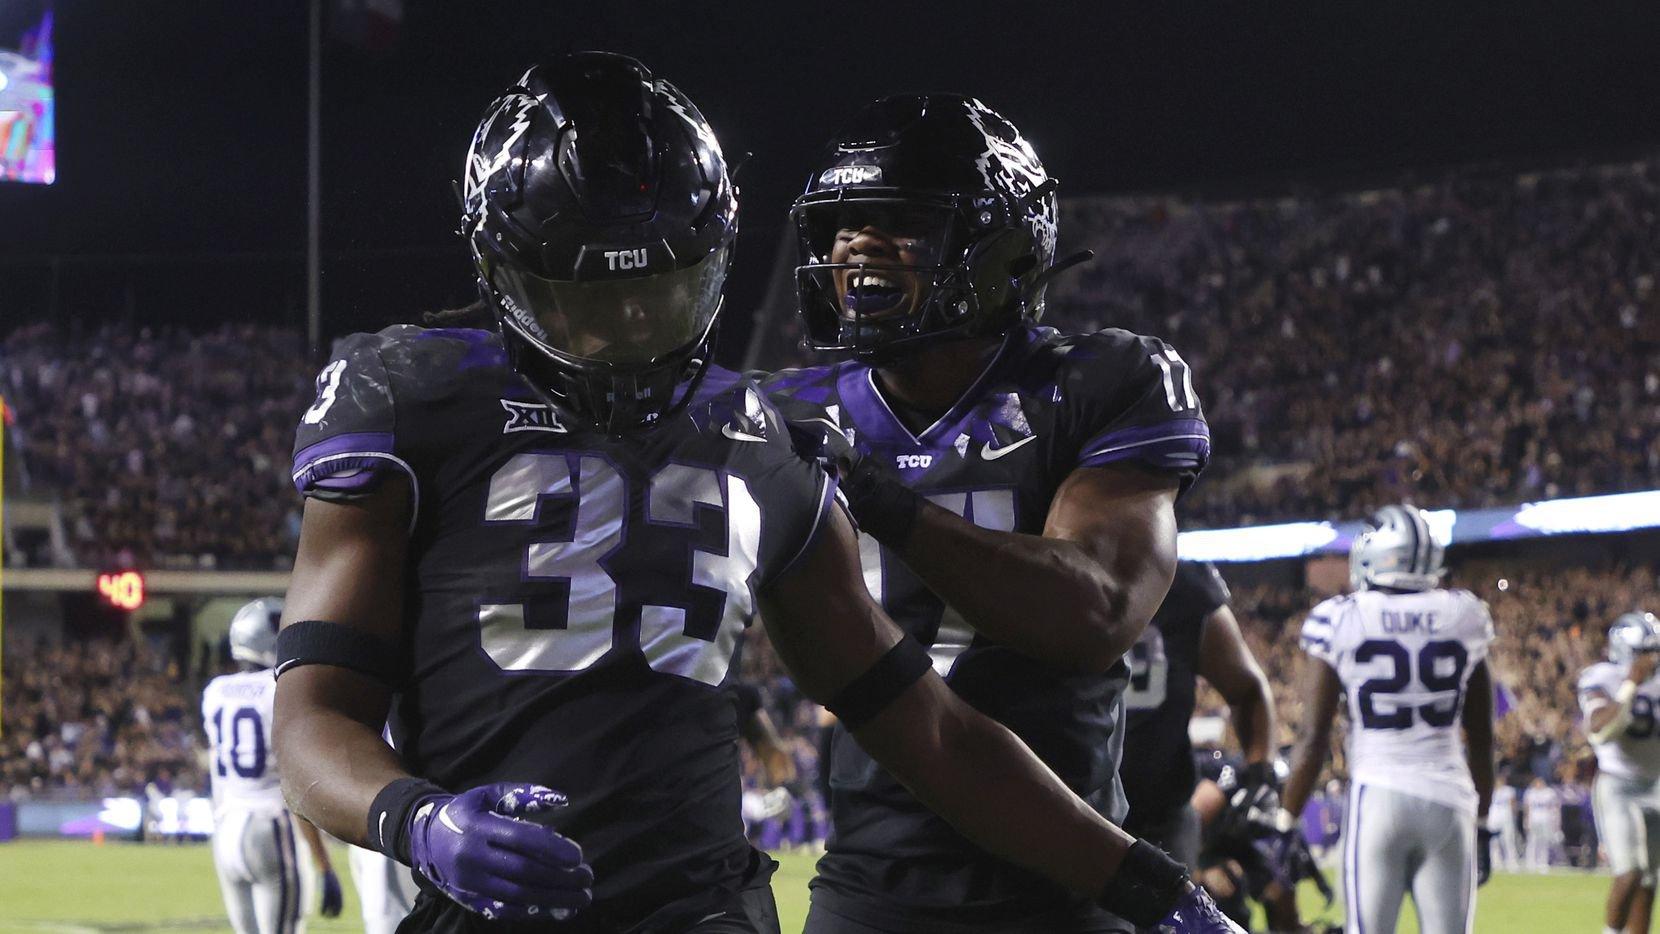 TCU vs. Baylor Football Betting: Will the Horned Frogs fight off the Bears’ upset bid in Waco?